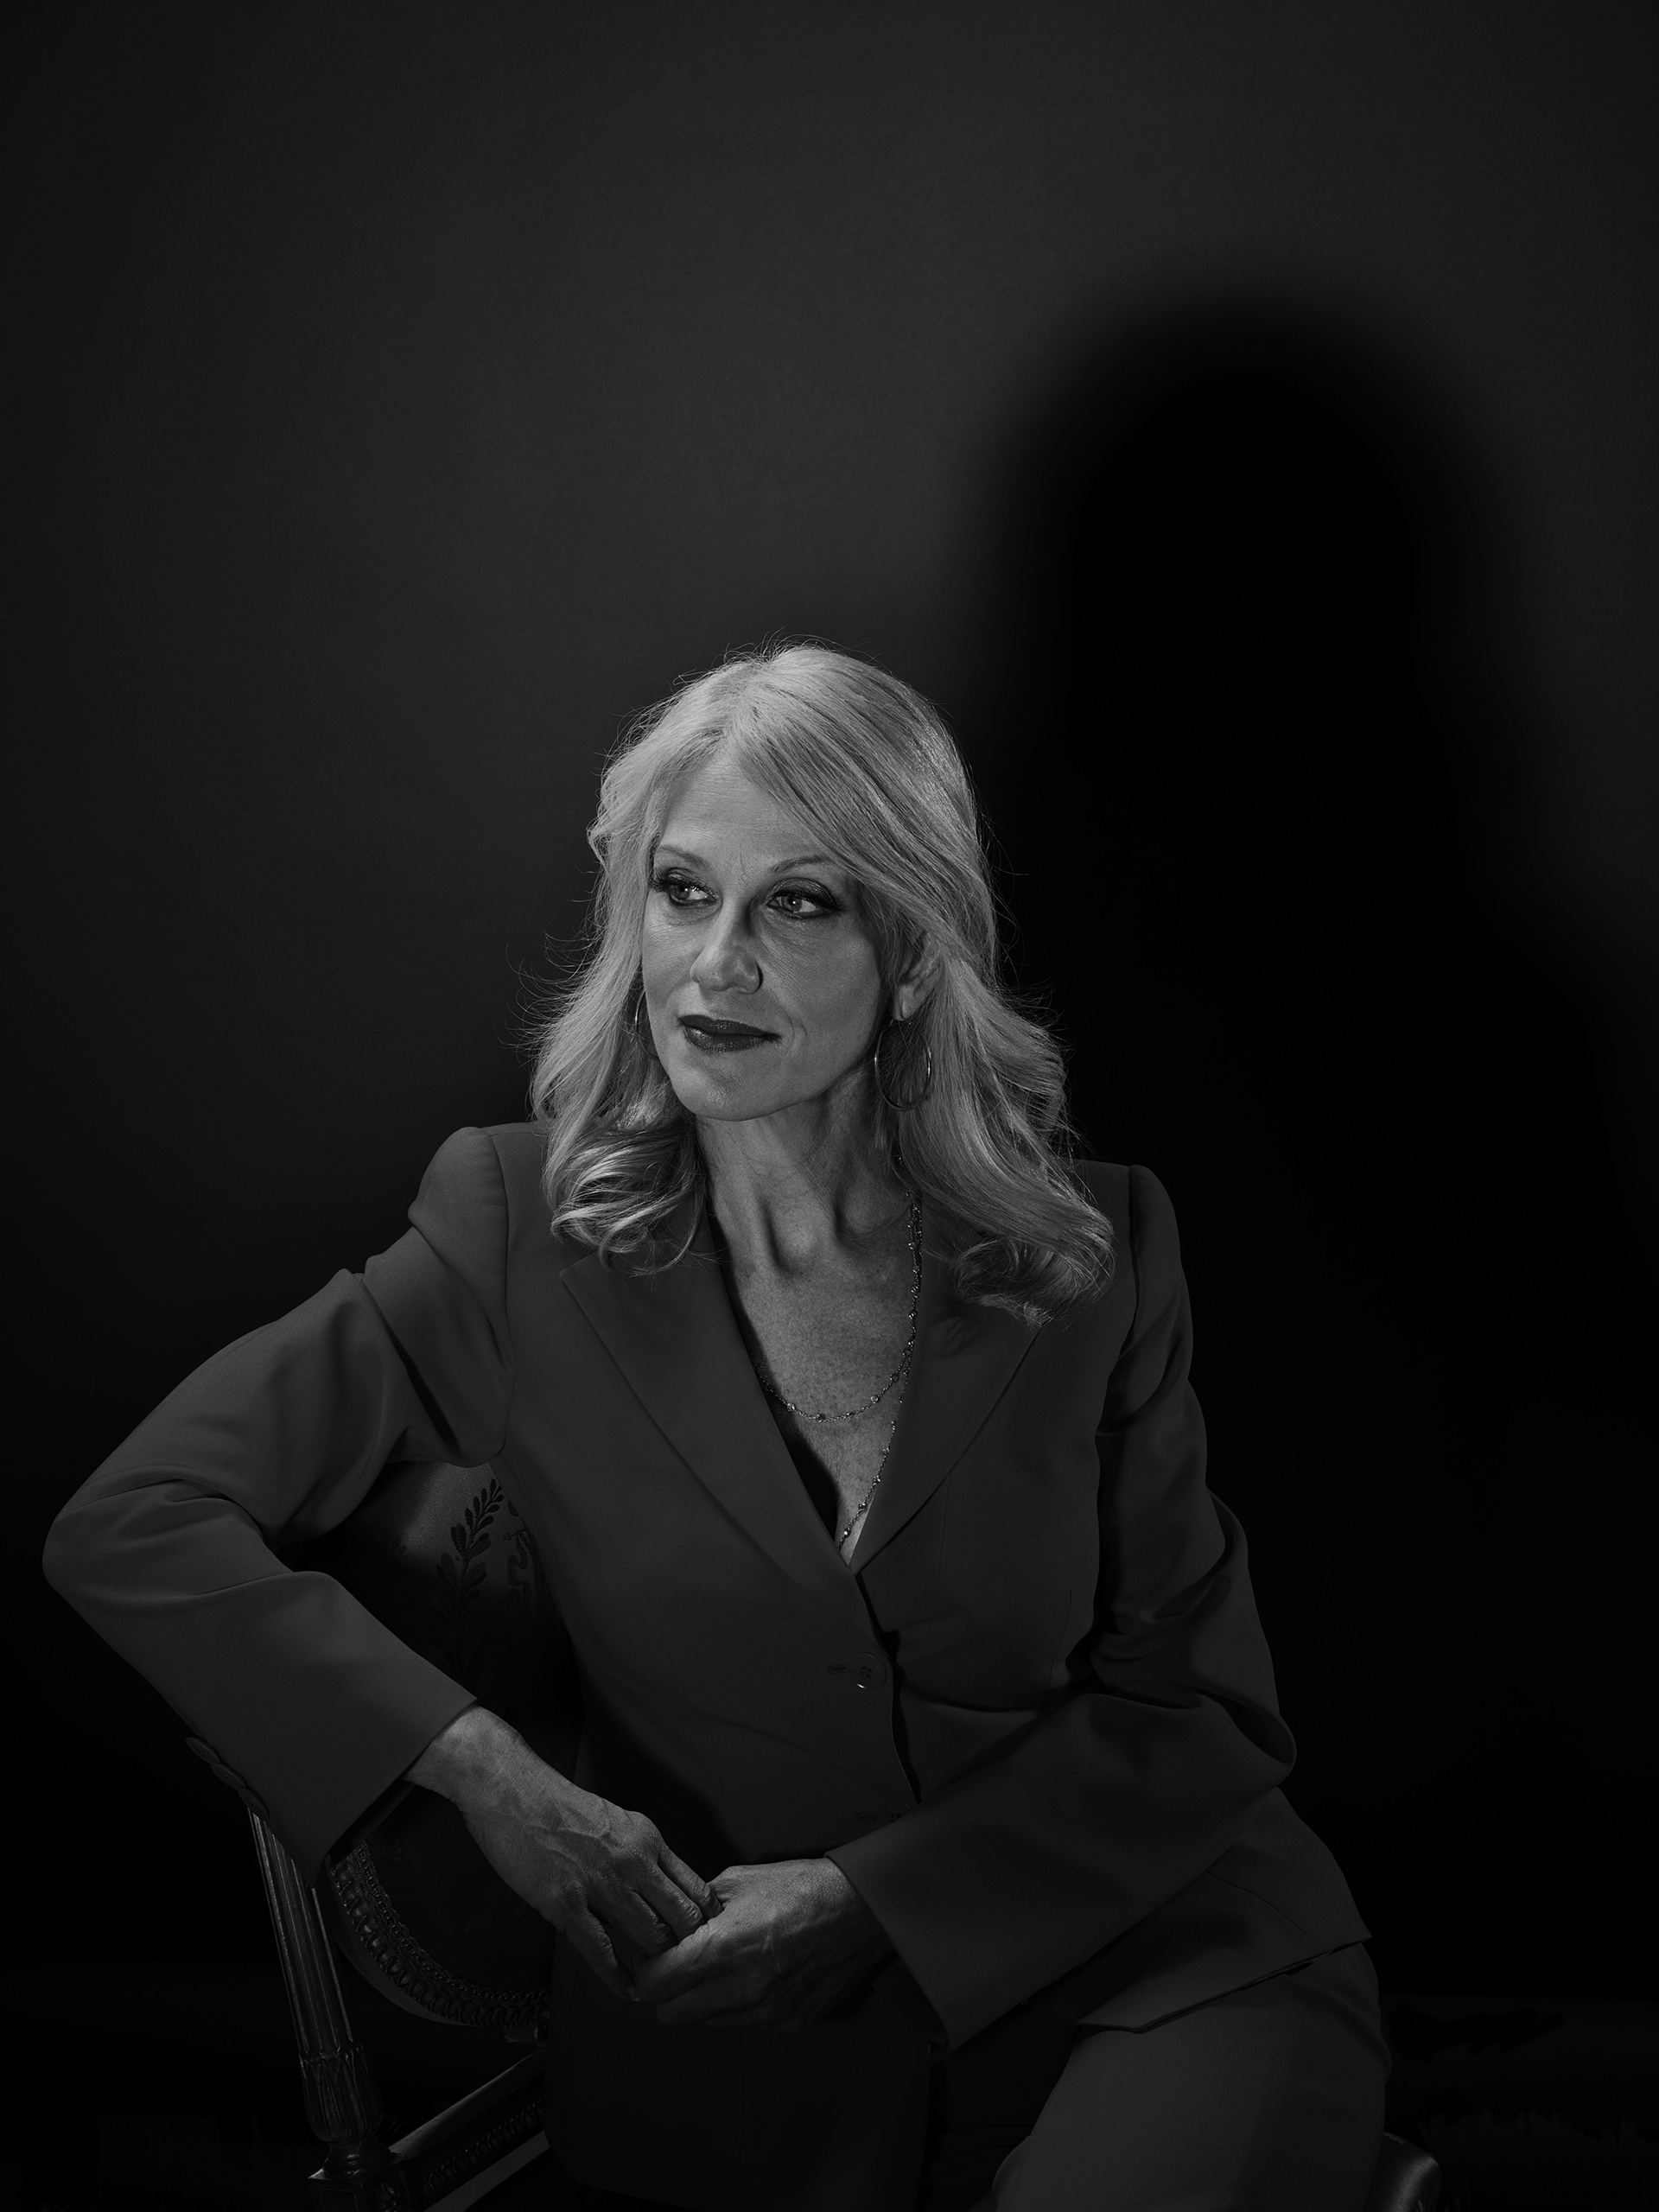 The Trump Whisperer
                              A former resident of one of Trump’s buildings, pollster Kellyanne Conway became his campaign manager in August. She is known for her blunt advice, sometimes through TV appearances.